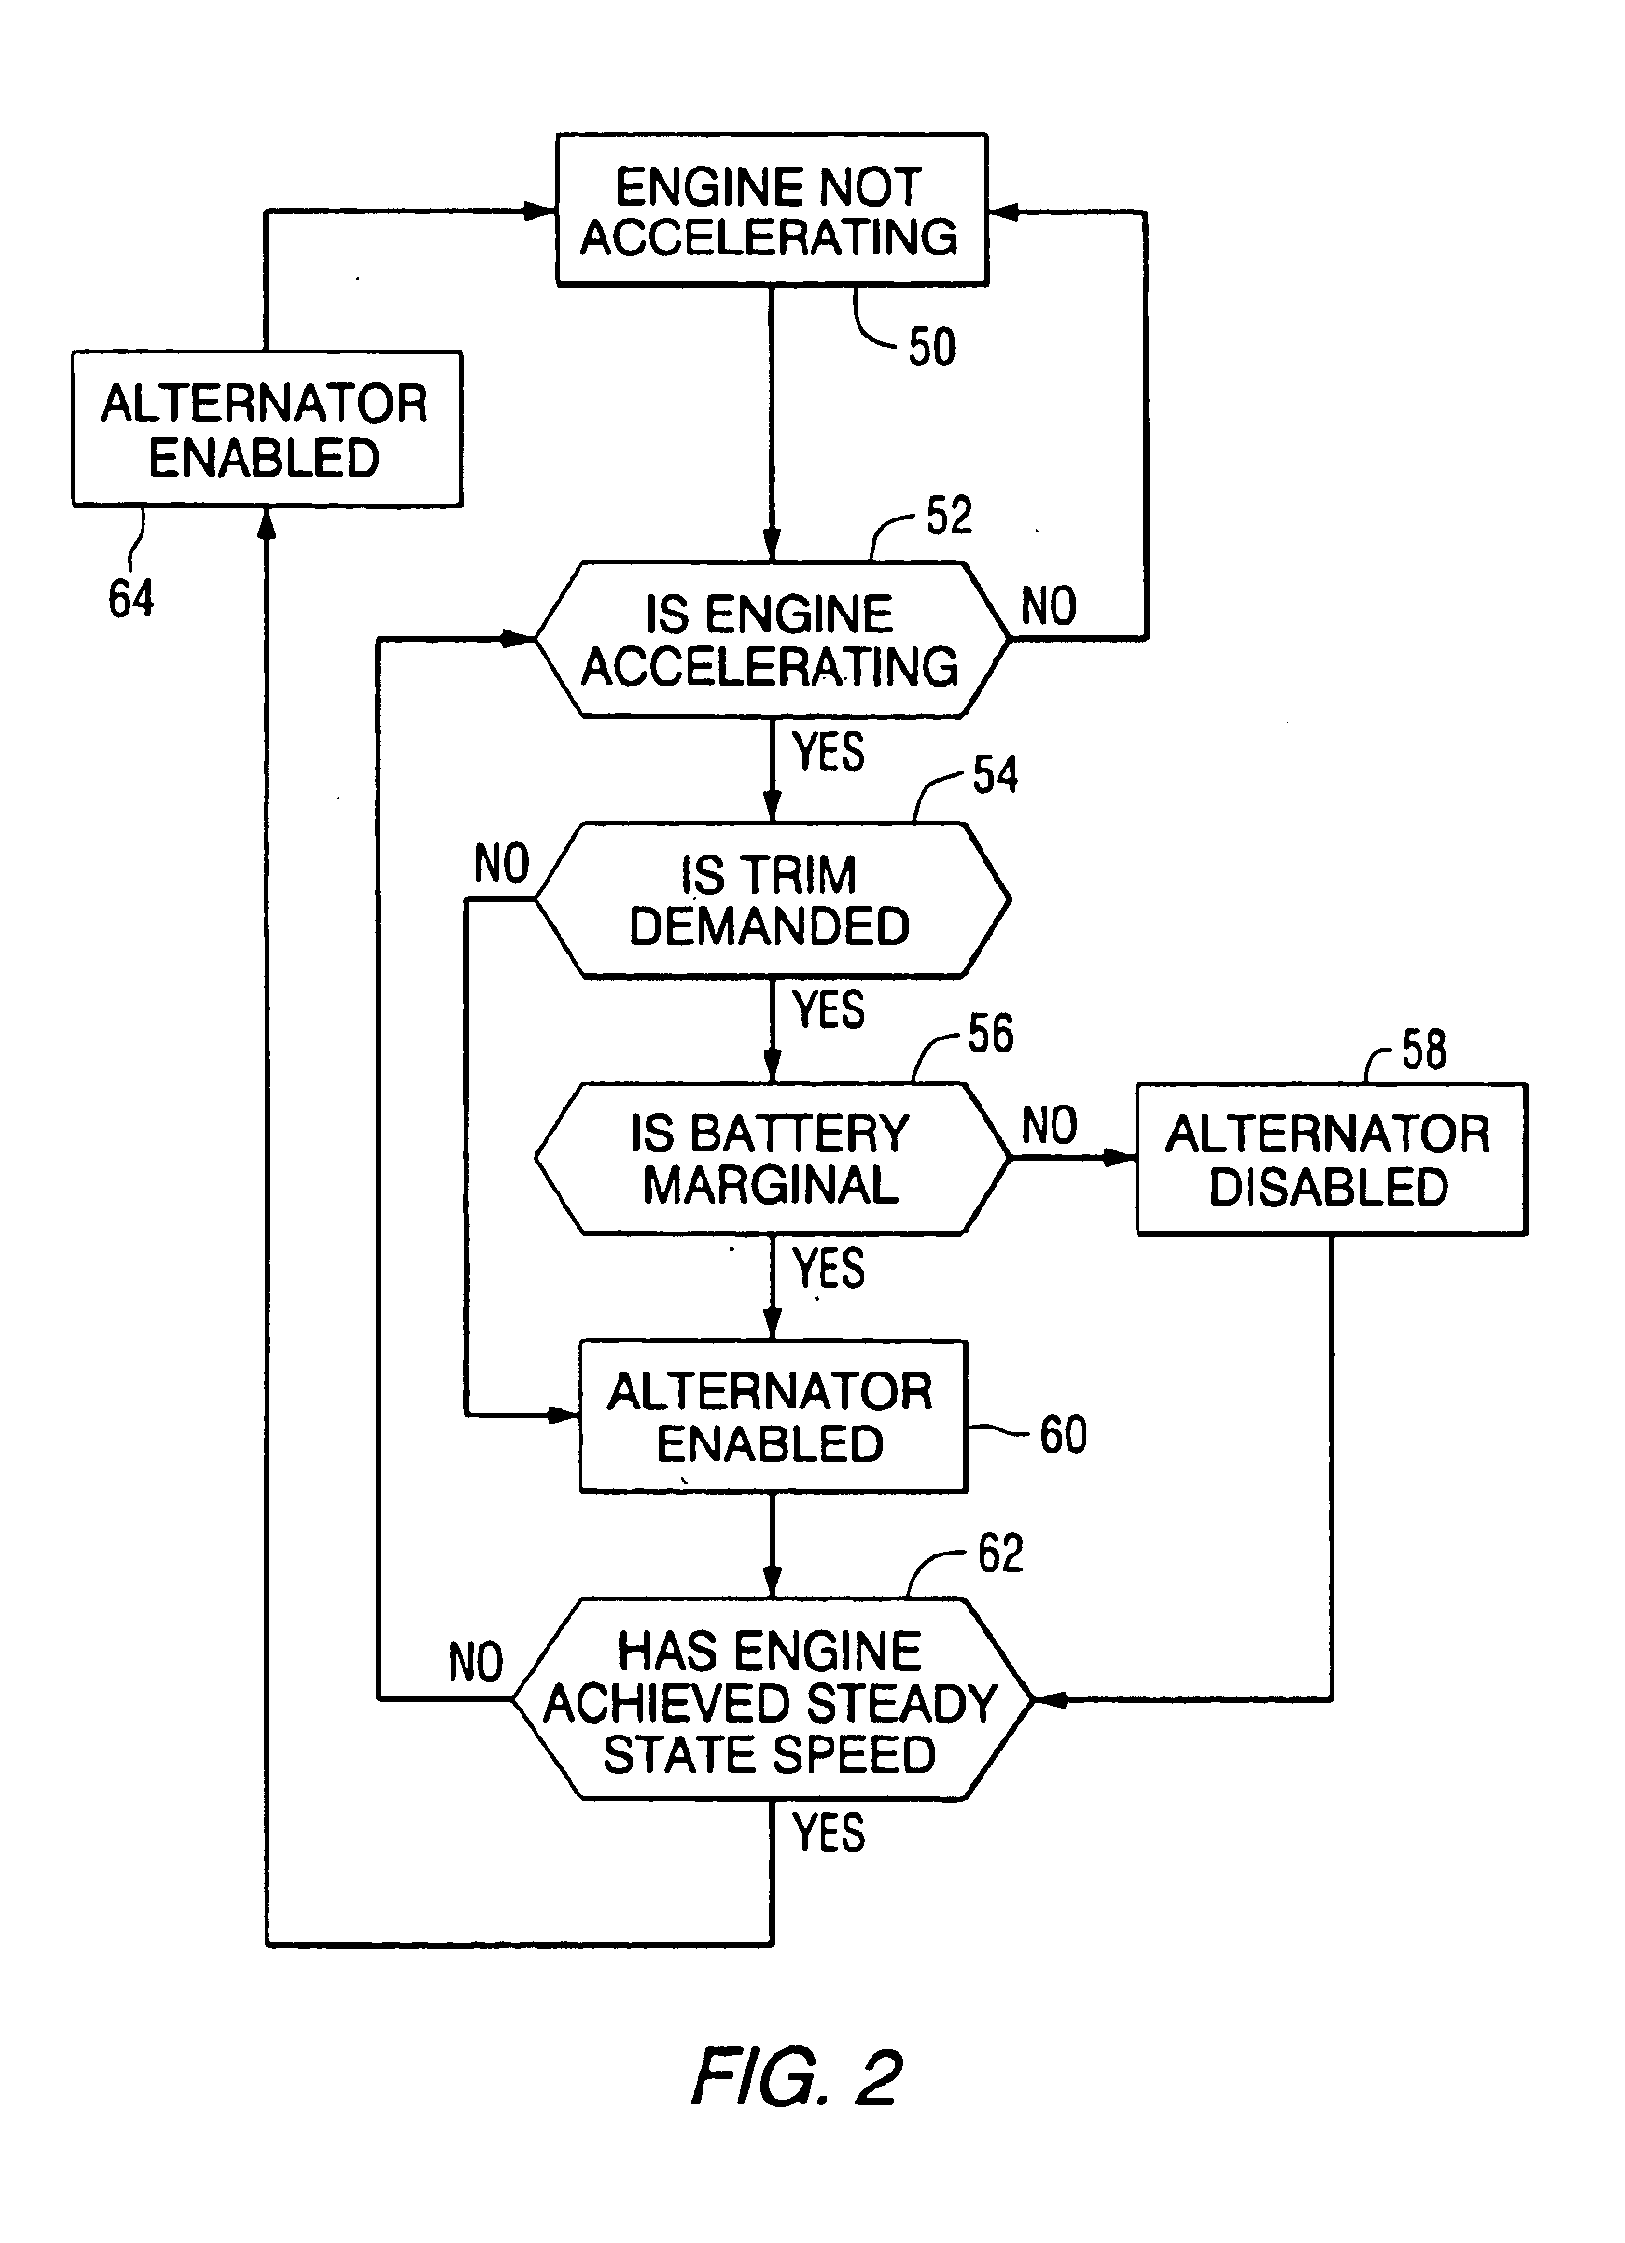 Method for deactivating a marine alternator during periods of high engine power requirements